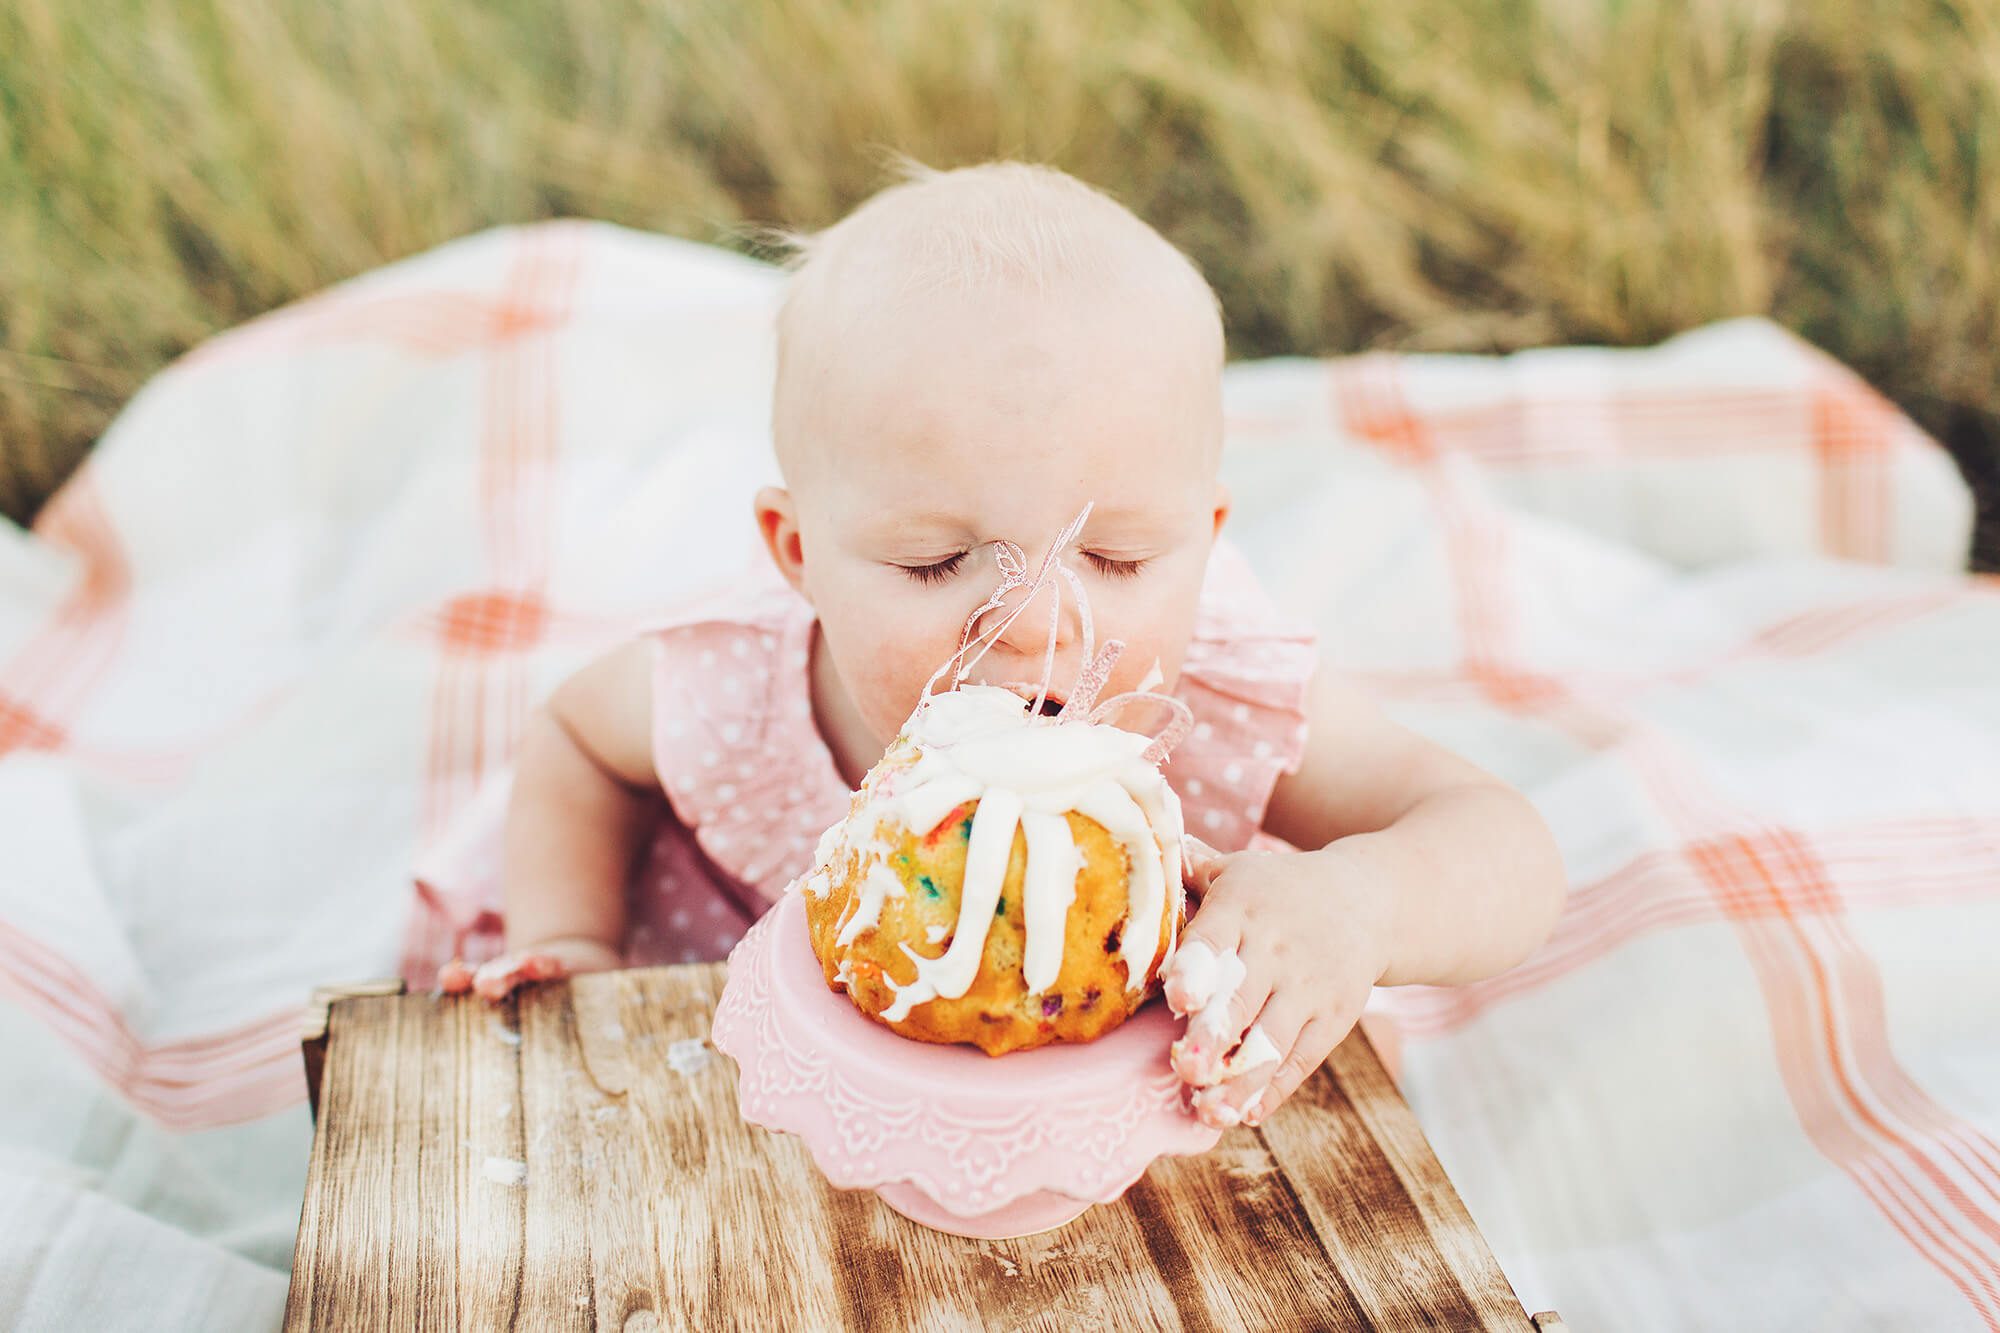 A big bite of cake for this little girl's first birthday cake smash during the Tawney Family's session.